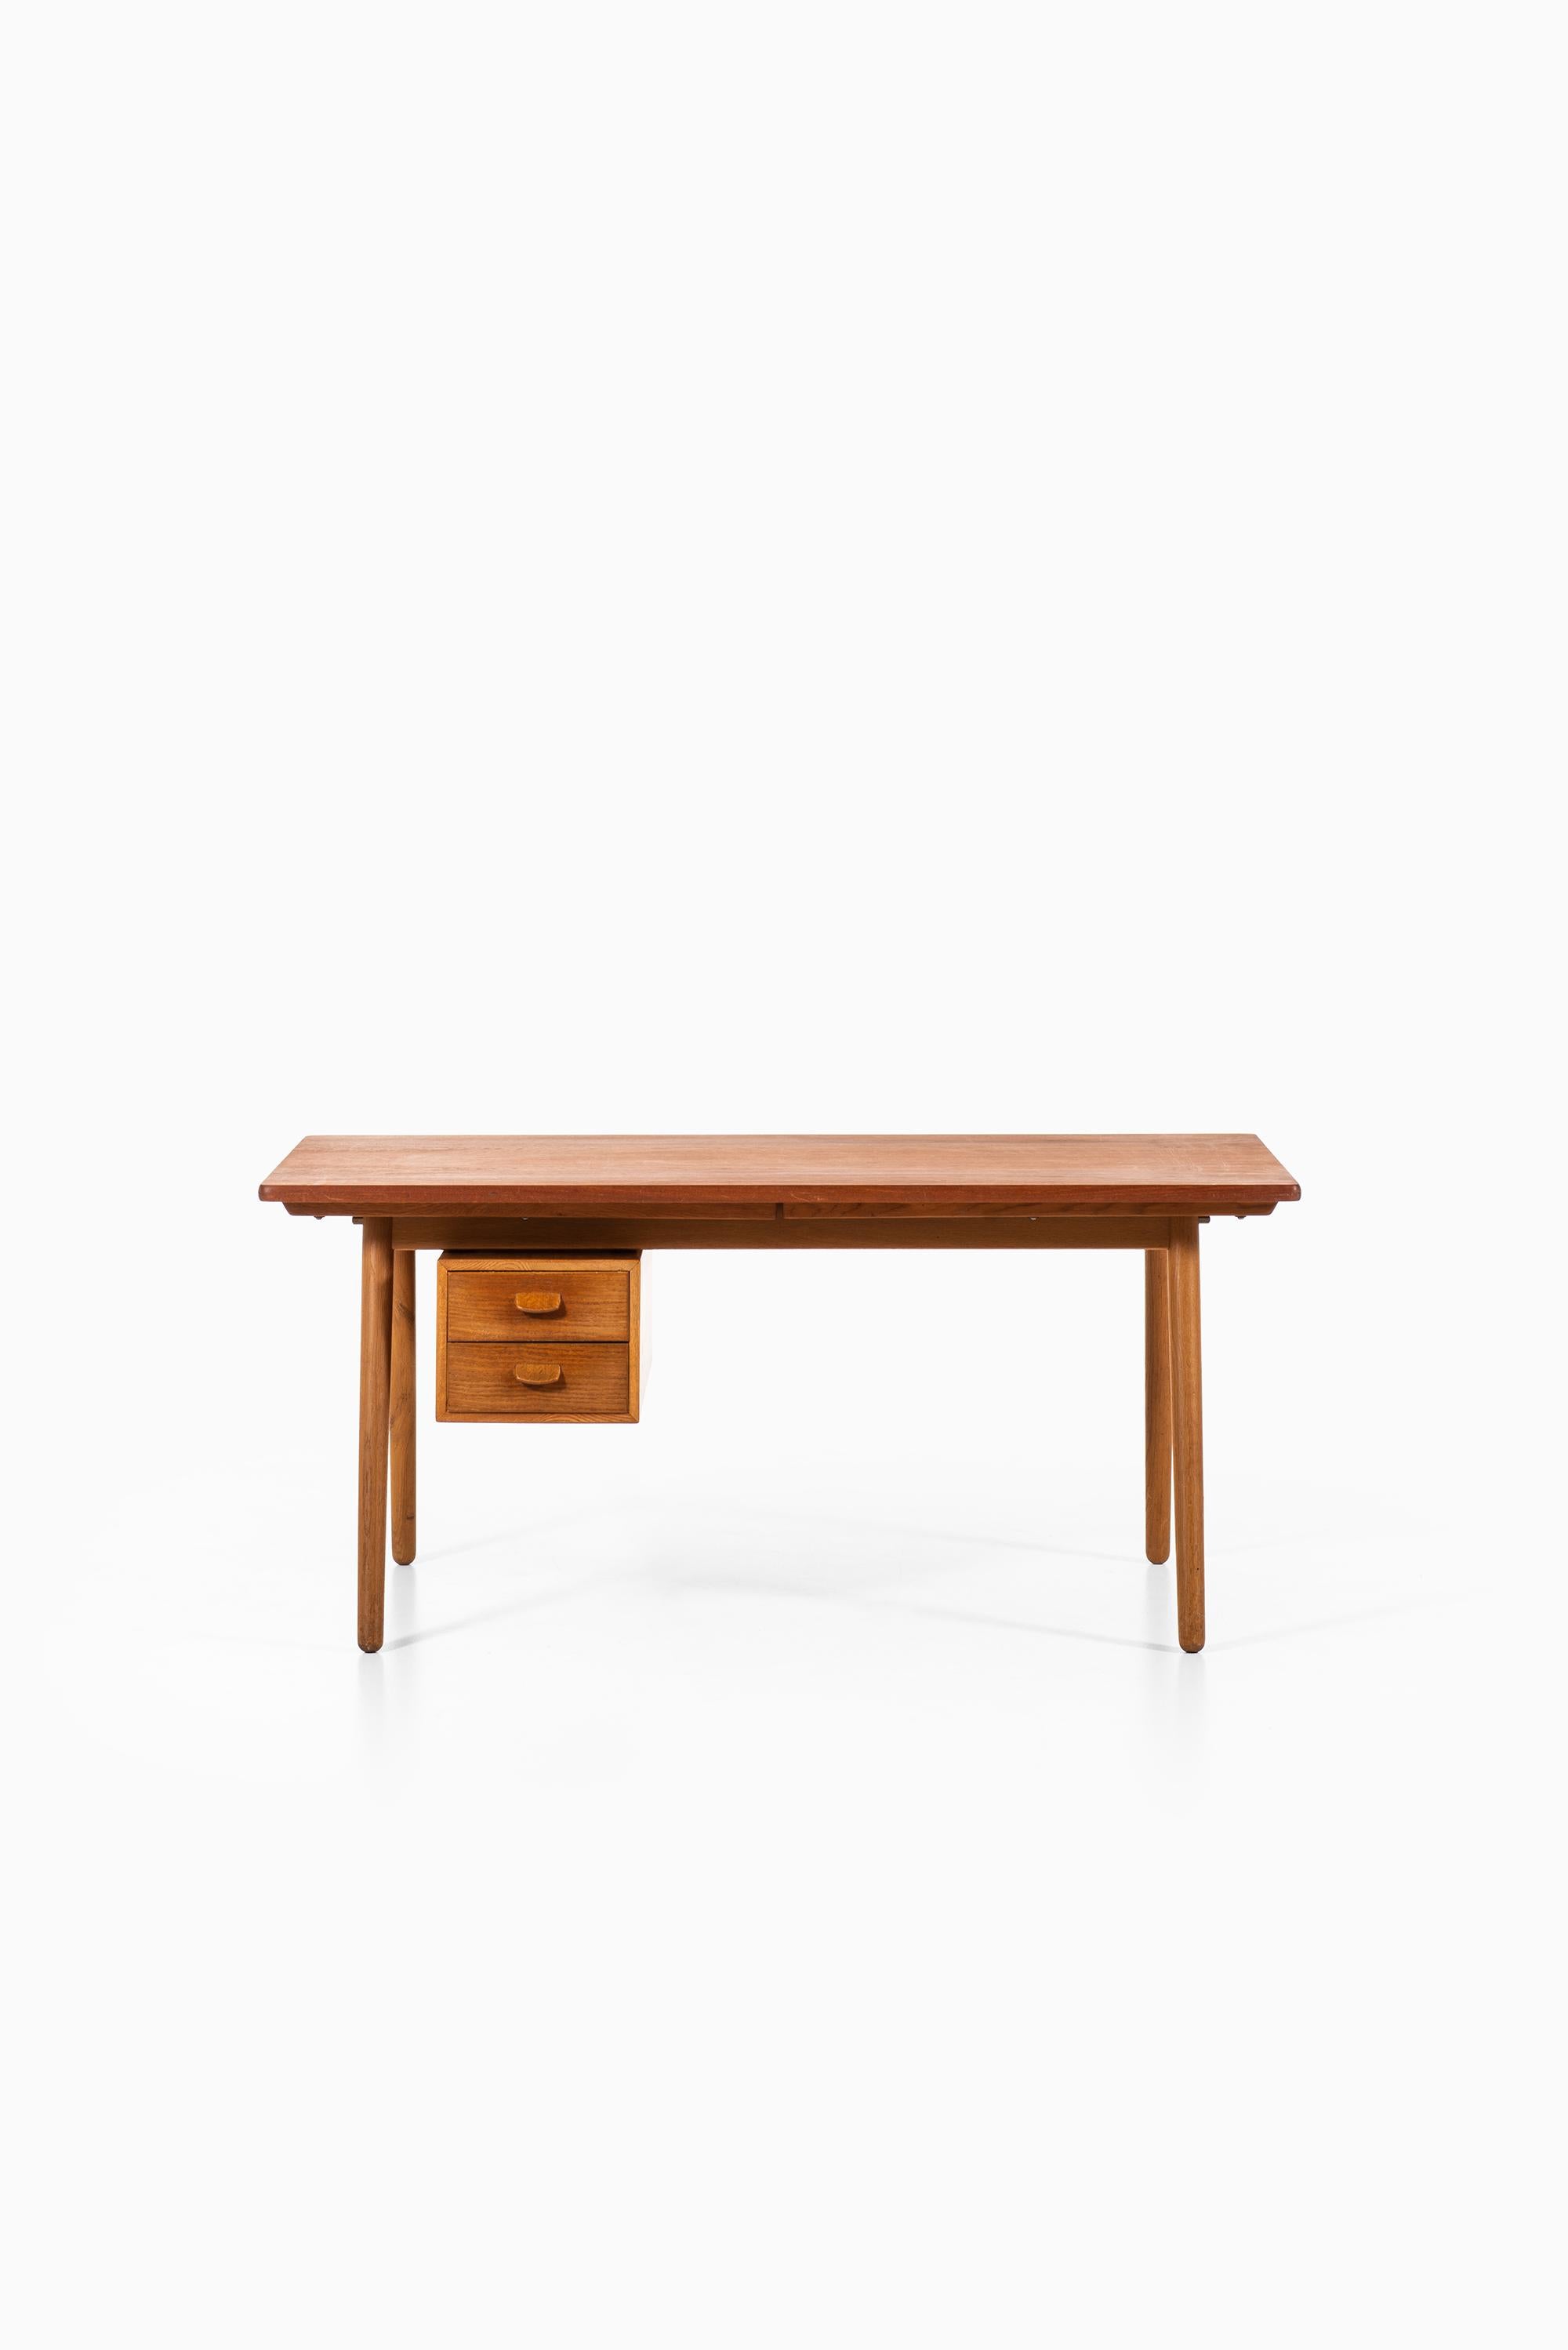 Very rare desk designed by Poul Volther. Produced by FDB Møbler in Denmark.